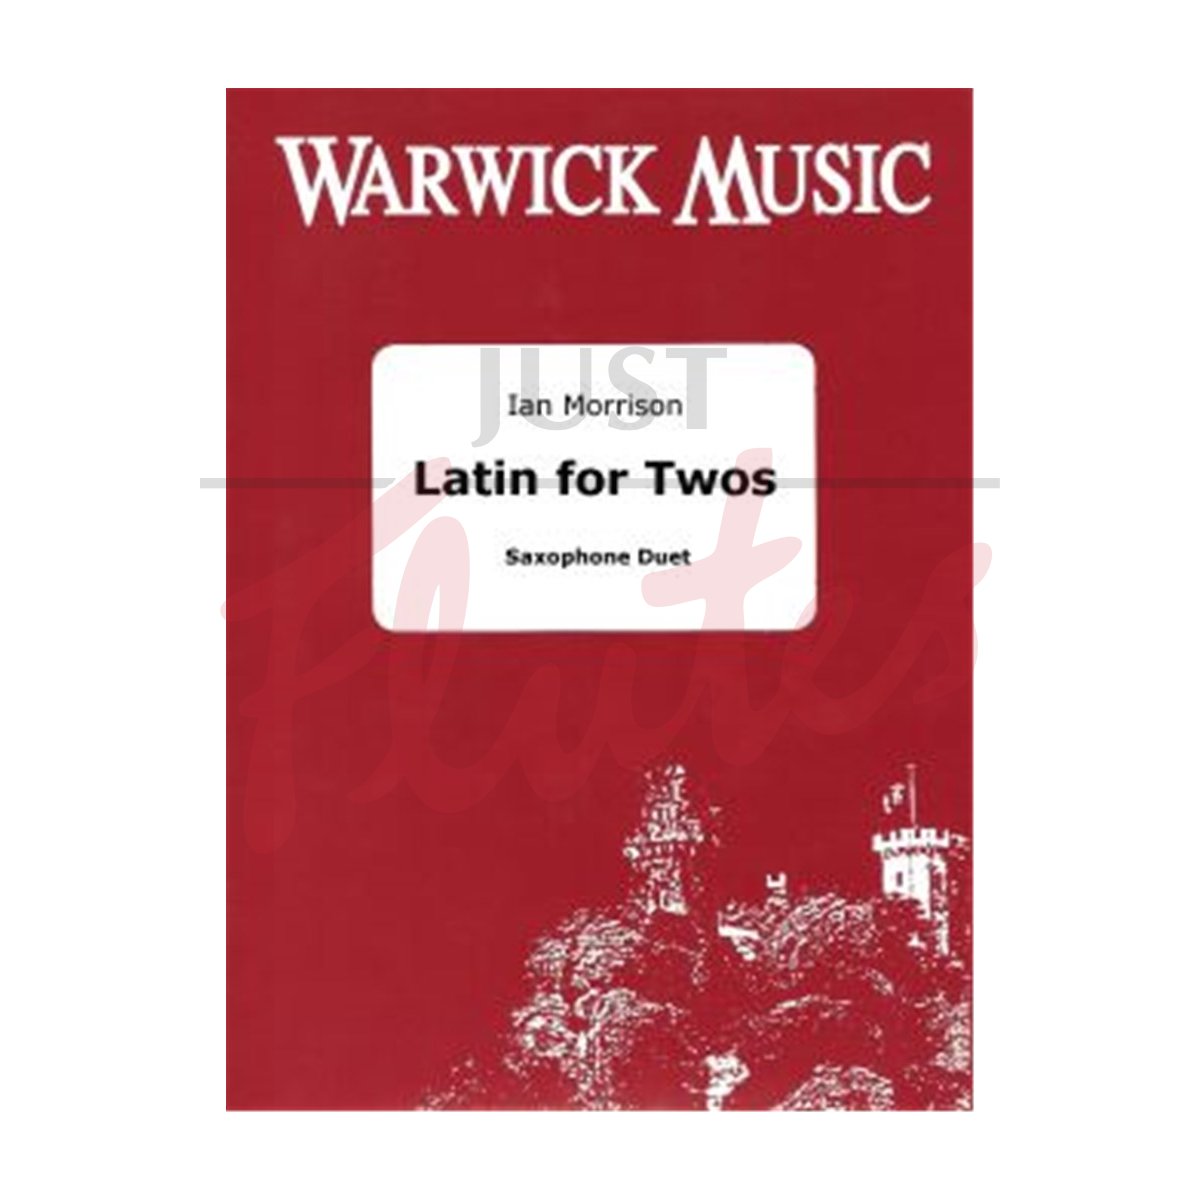 Latin for Twos for Saxophone Duet